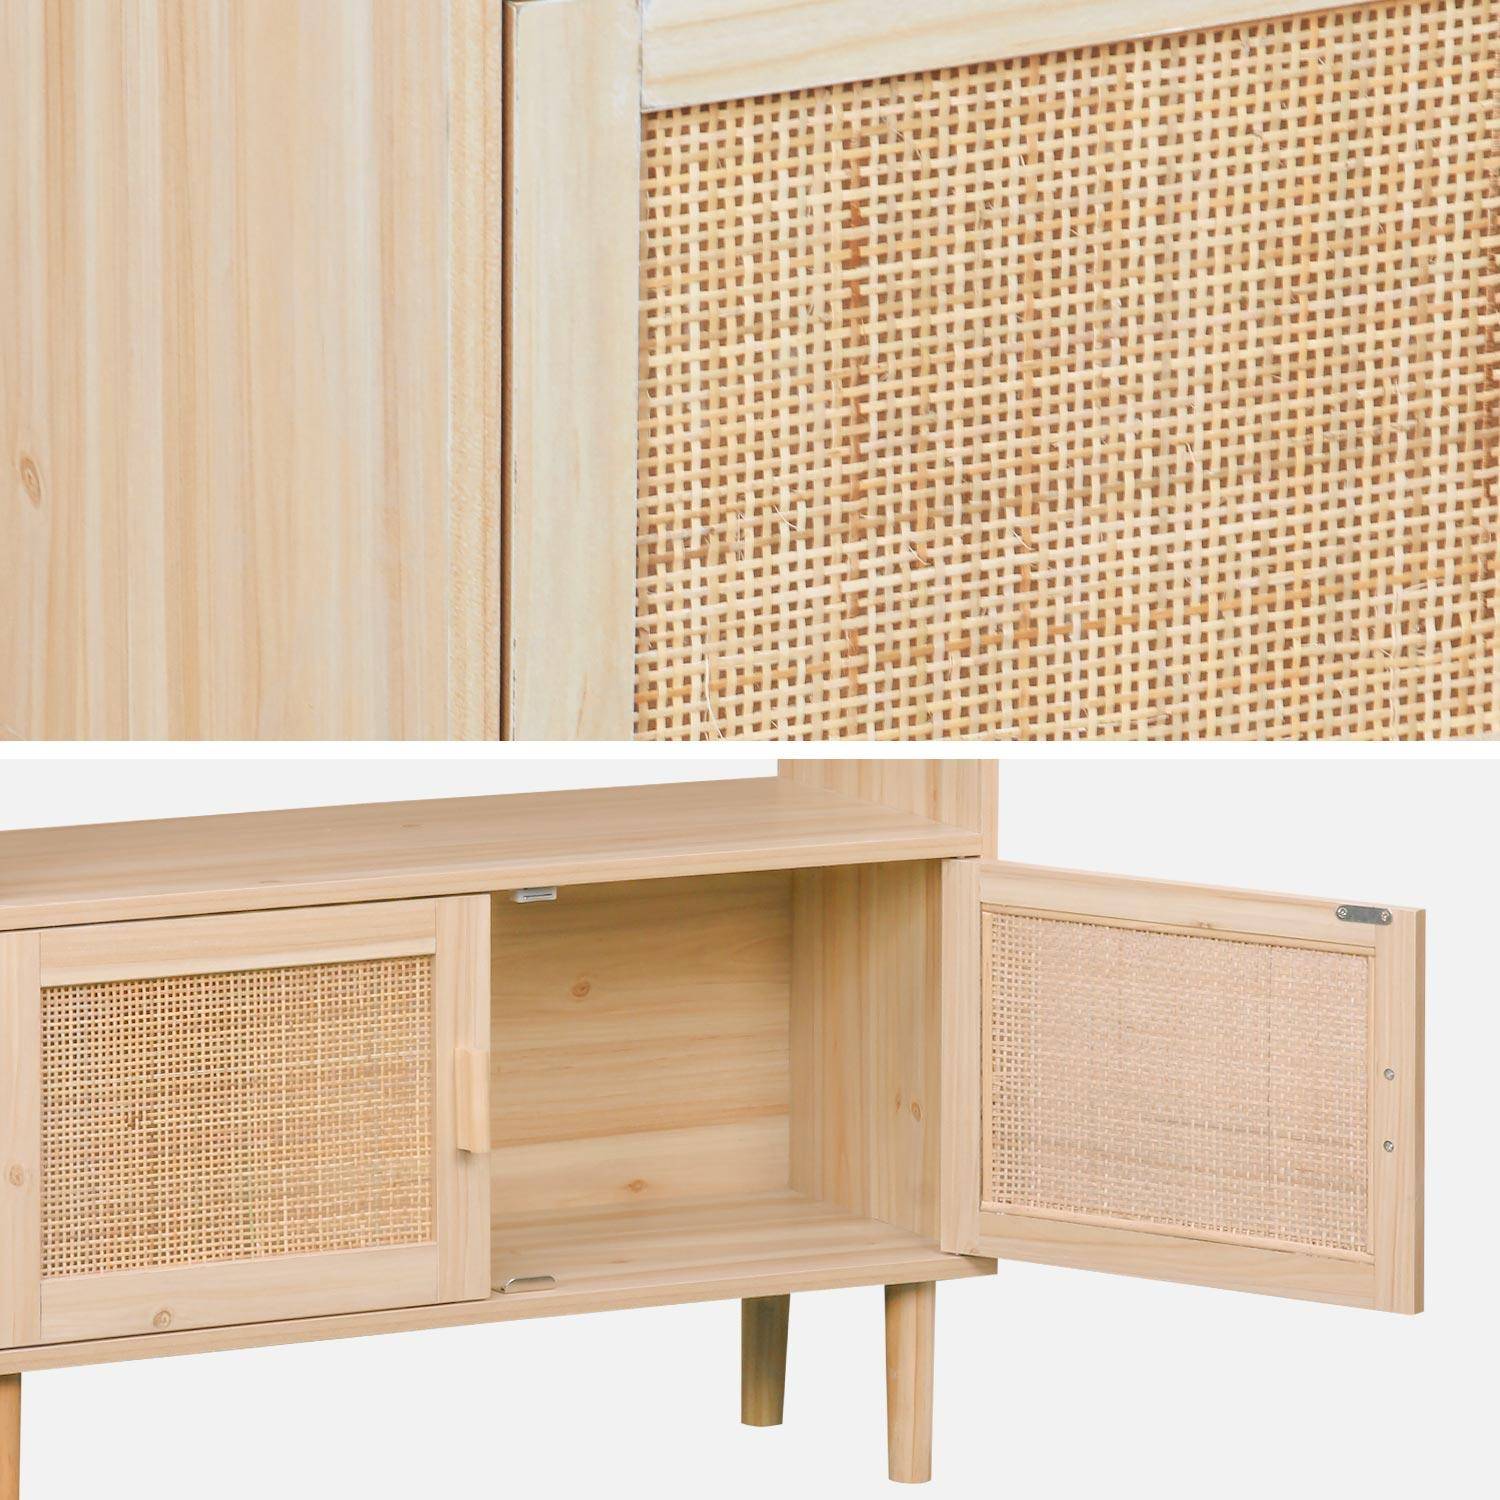 Woven rattan bookcase with storage cupboard, 3 shelves, 2 doors, 80x30x140cm - Camargue - Natural,sweeek,Photo6